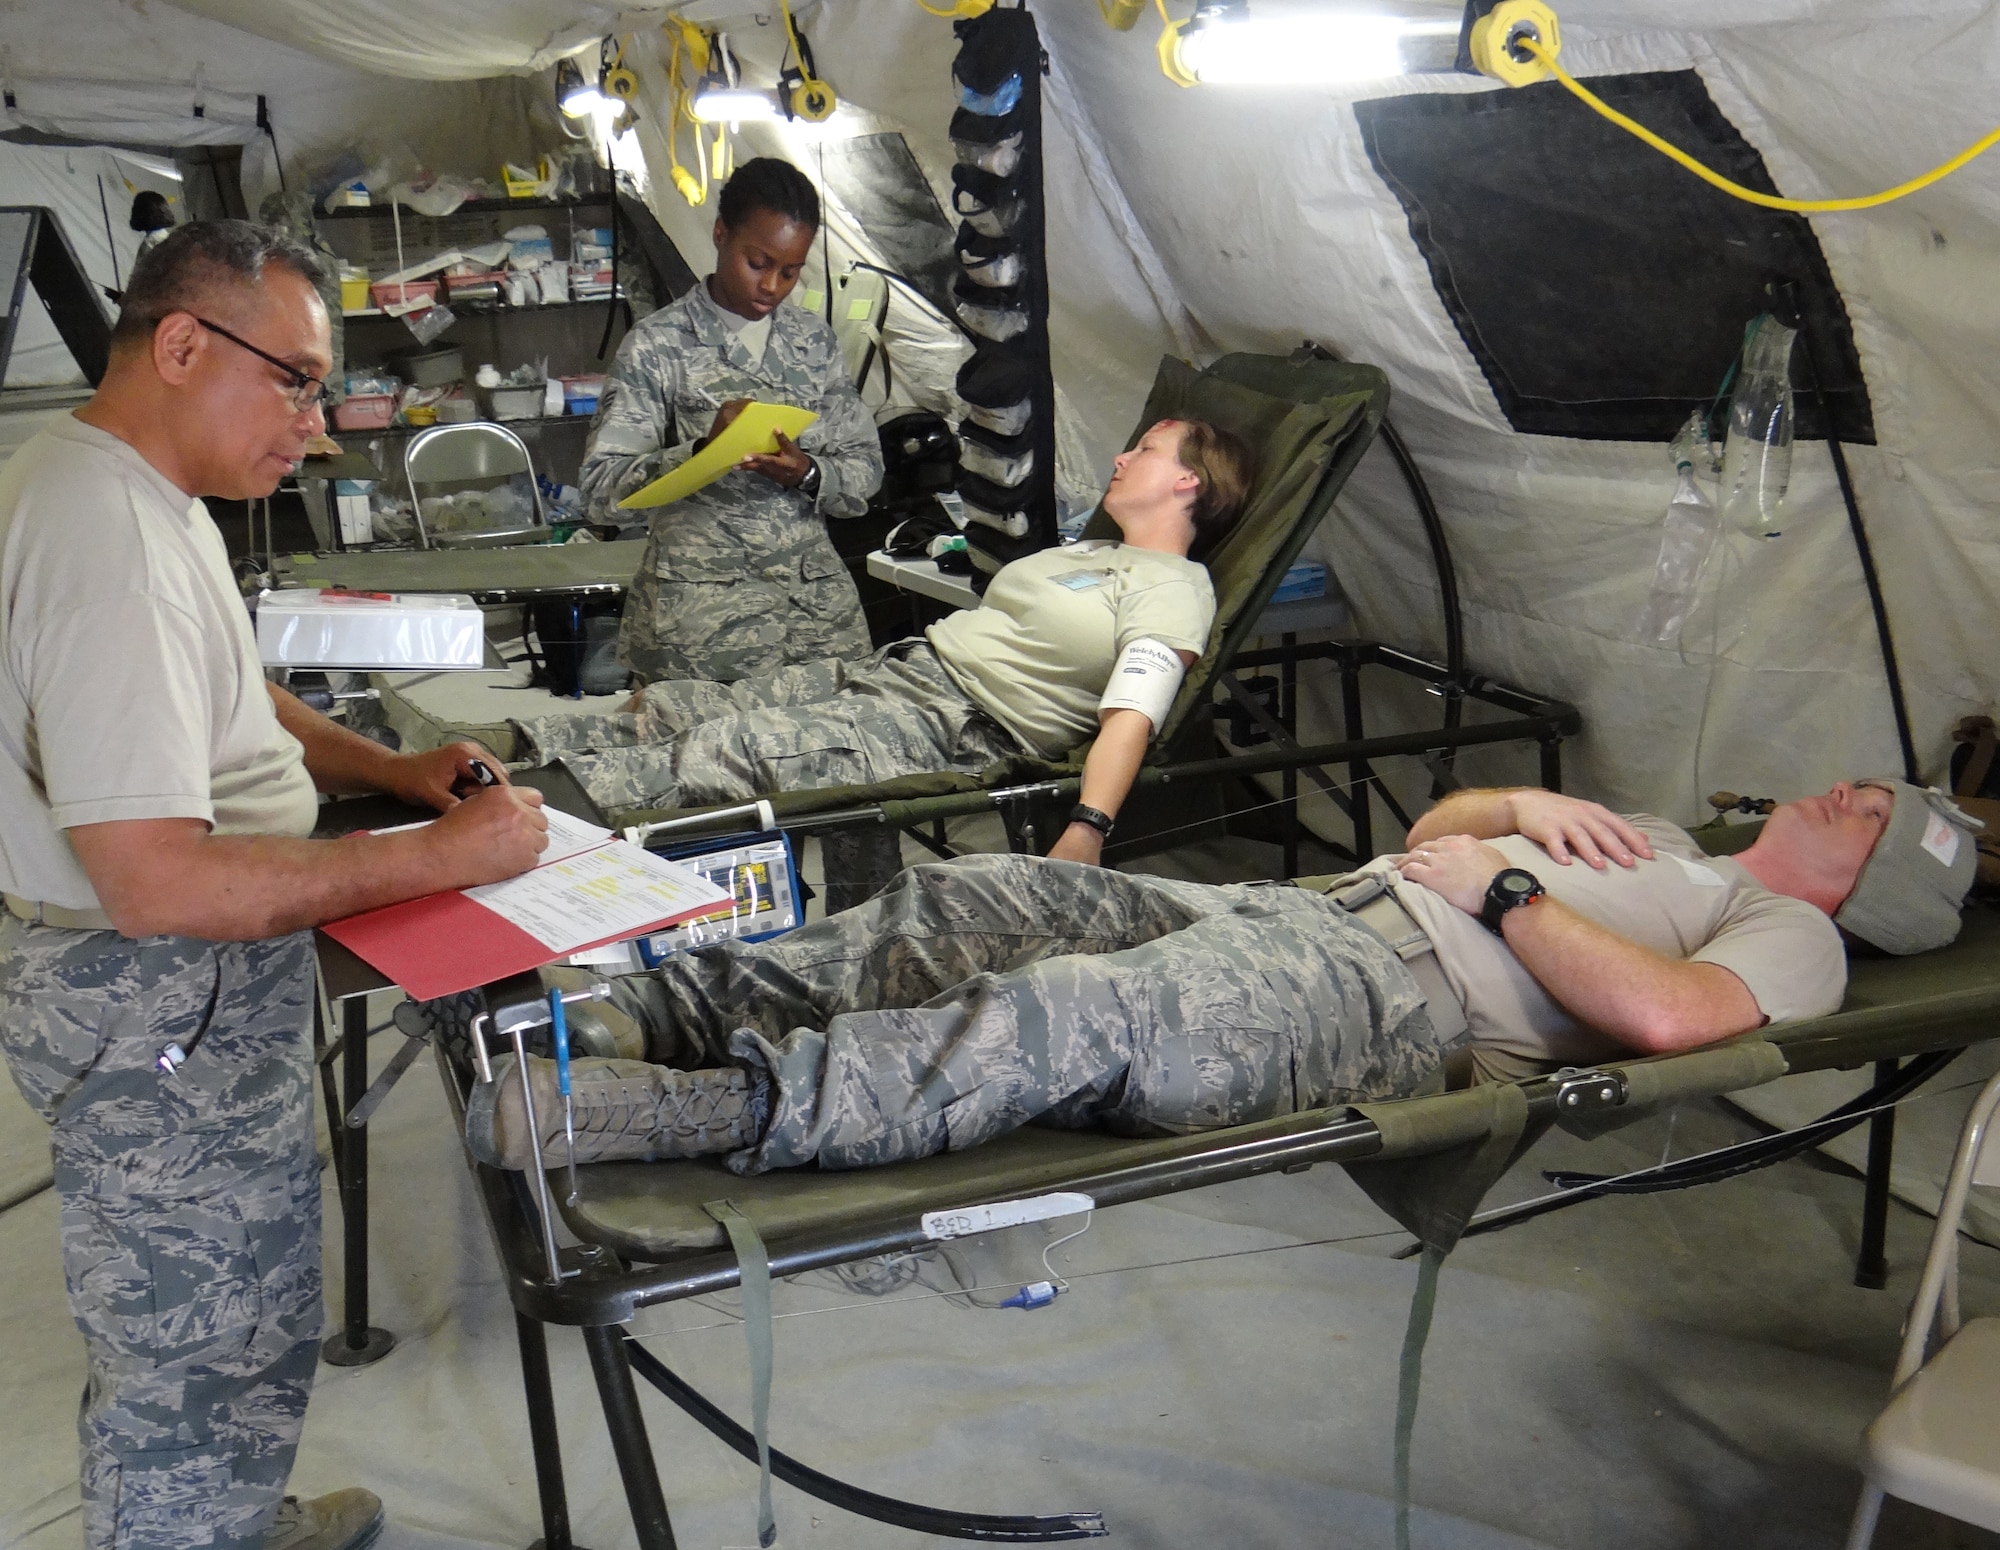 (Left to right) Lt. Col. Butch Tubera, 301st Medical Squadron internal medicine physician, and Senior Airman Vanessa Cole, 301 MDS aerospace medicine technician, review patients’ records during a training scenario June 25 in an Expeditionary Medical Support facility at the Medical Readiness Training Center, Camp Bullis, San Antonio, Texas. Nearly 100 Reservists trained June 22-26 at the Medical Readiness Training Center for mandatory deployment training. Reservists established and operated an Expeditionary Medical Support (EMEDS) facility complete with an emergency room, ambulatory care, lab, radiology, pharmacy, Bio-Environmental/public health, dental, operating room, intensive care, nursing care and command capabilities. (U.S. Air Force photo/Chief Master Sgt. Robert Poisson)